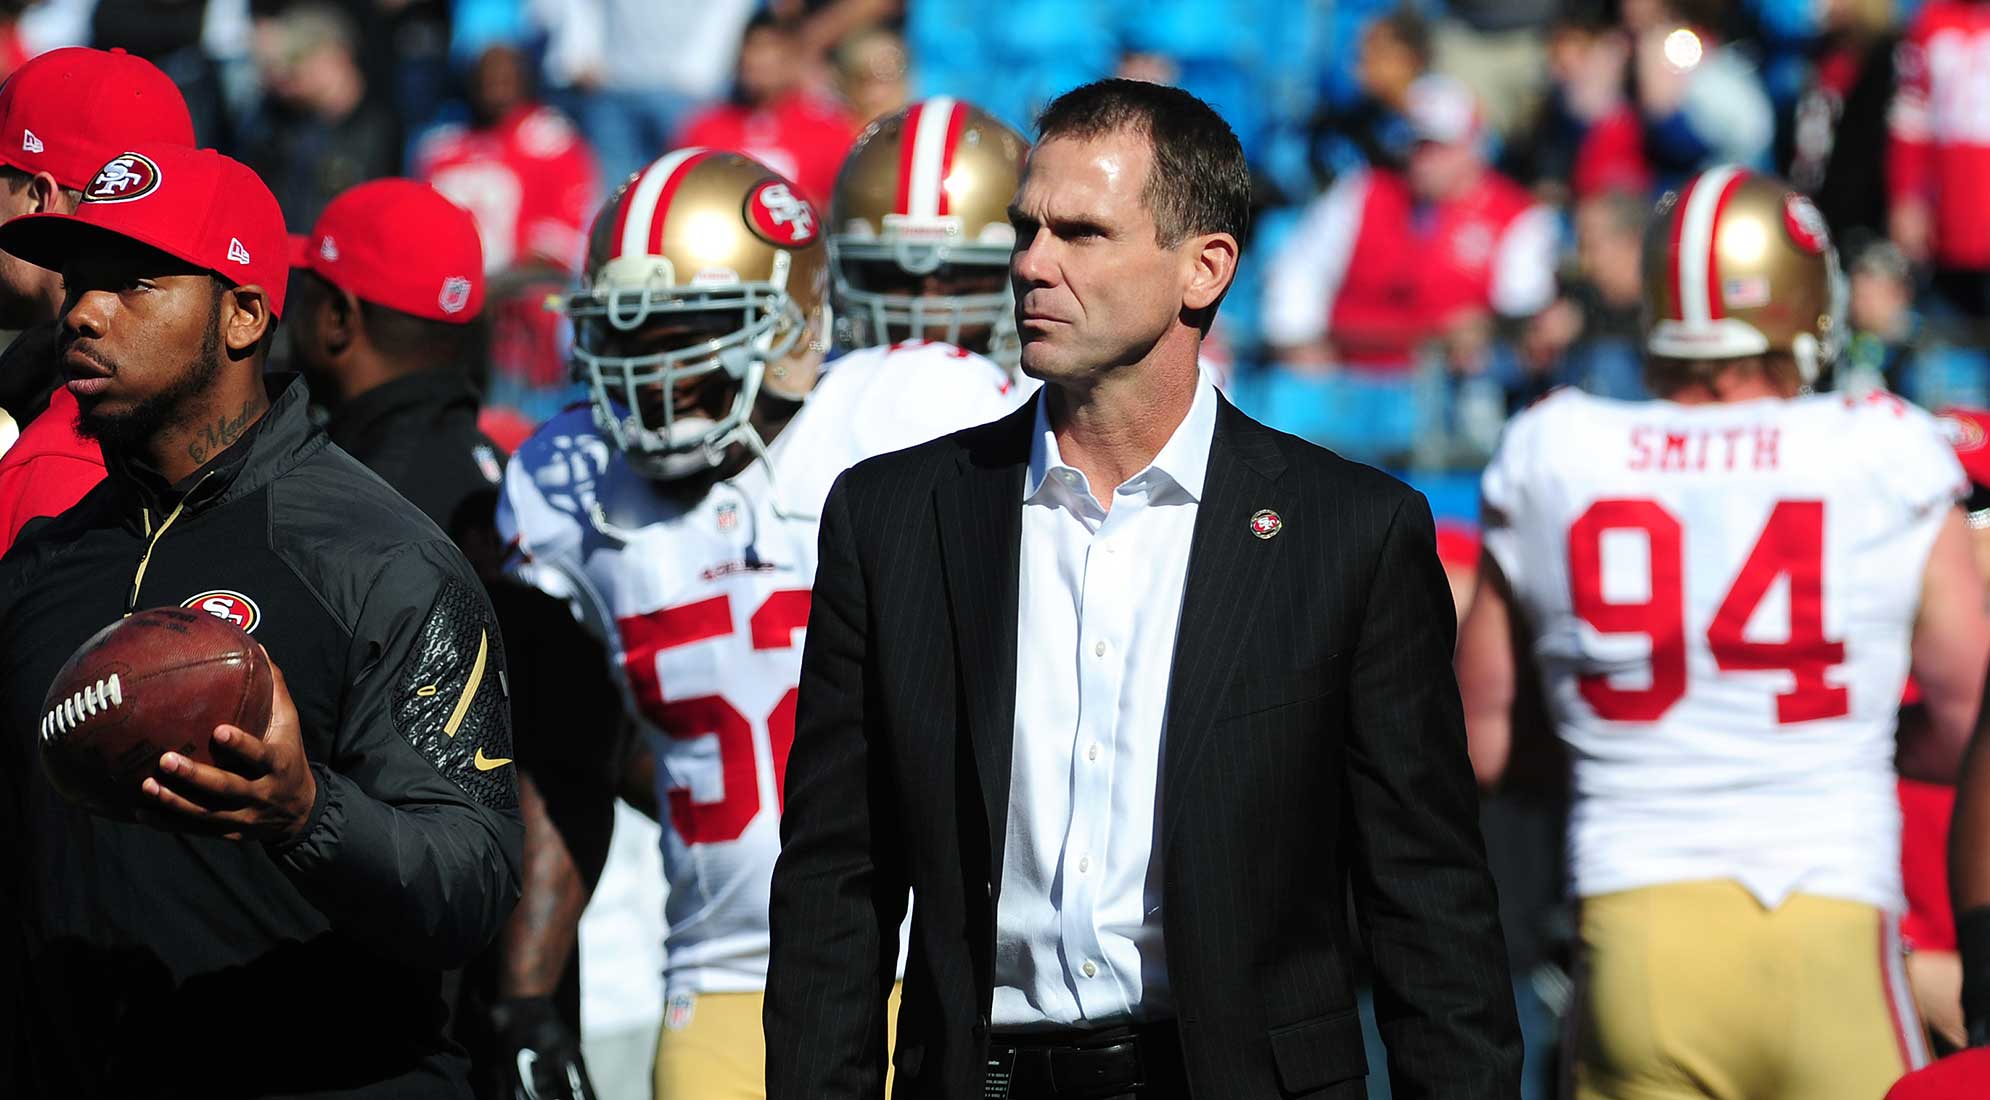 Courtesy of NFL.com: If Trent Baalke deserves some of the blame, let's give him some credit too. 